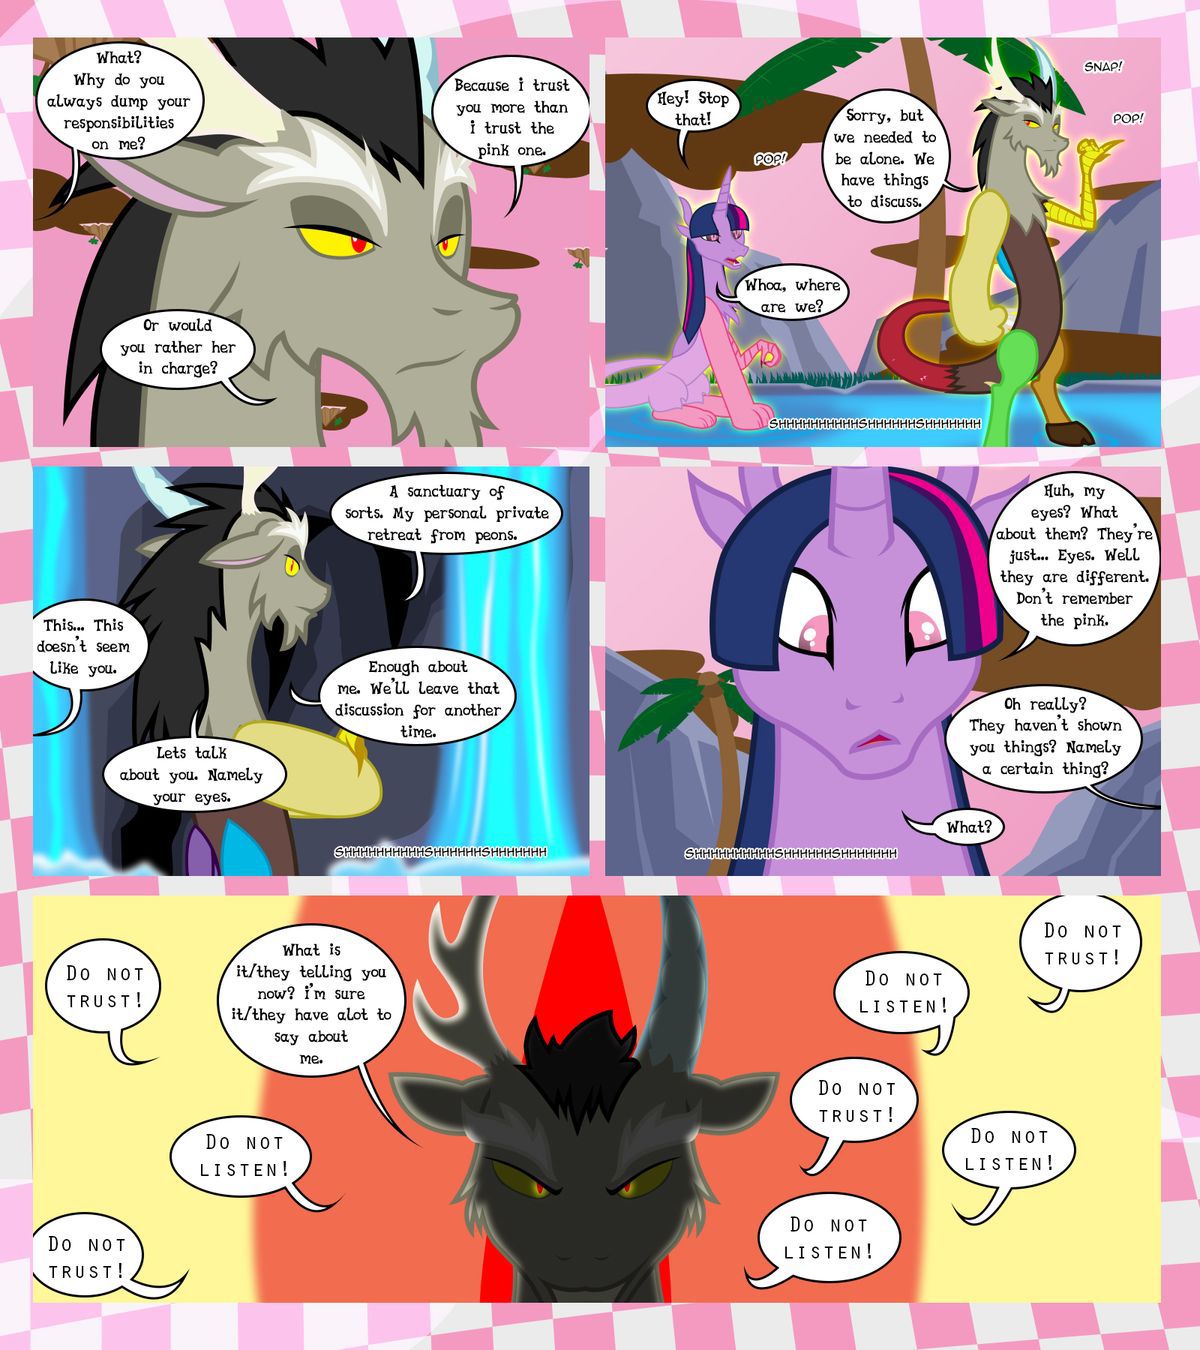 [GatesMcCloud] Cutie Mark Crusaders 10k: Chapter 3 - The Lost (My Little Pony: Friendship is Magic) [English] [Ongoing] 22